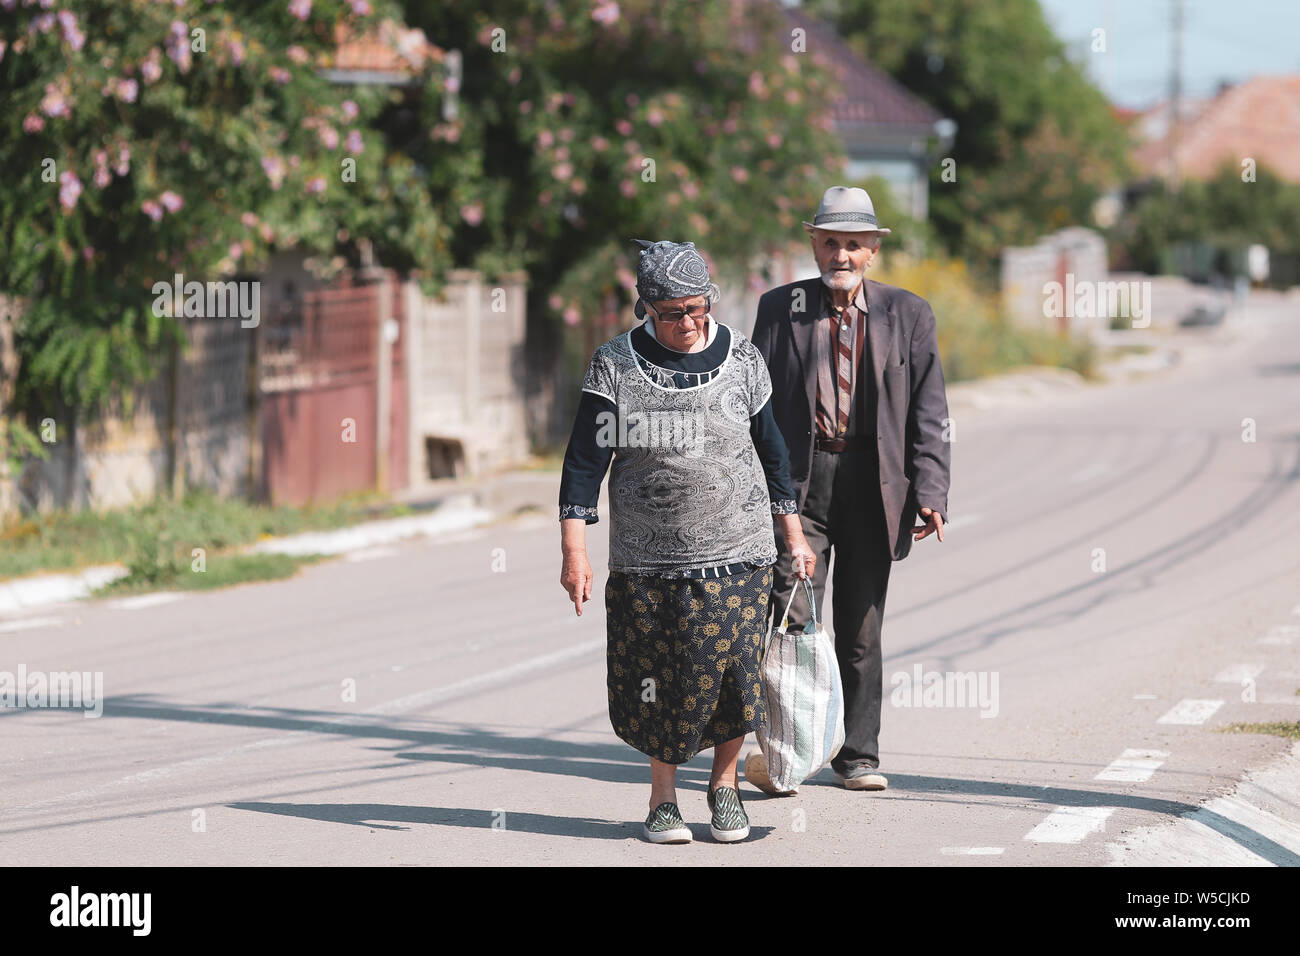 Bontida, Romania - July 21, 2019: An elderly couple on an empty street in a village in rural Romania on a hot bright summer day Stock Photo